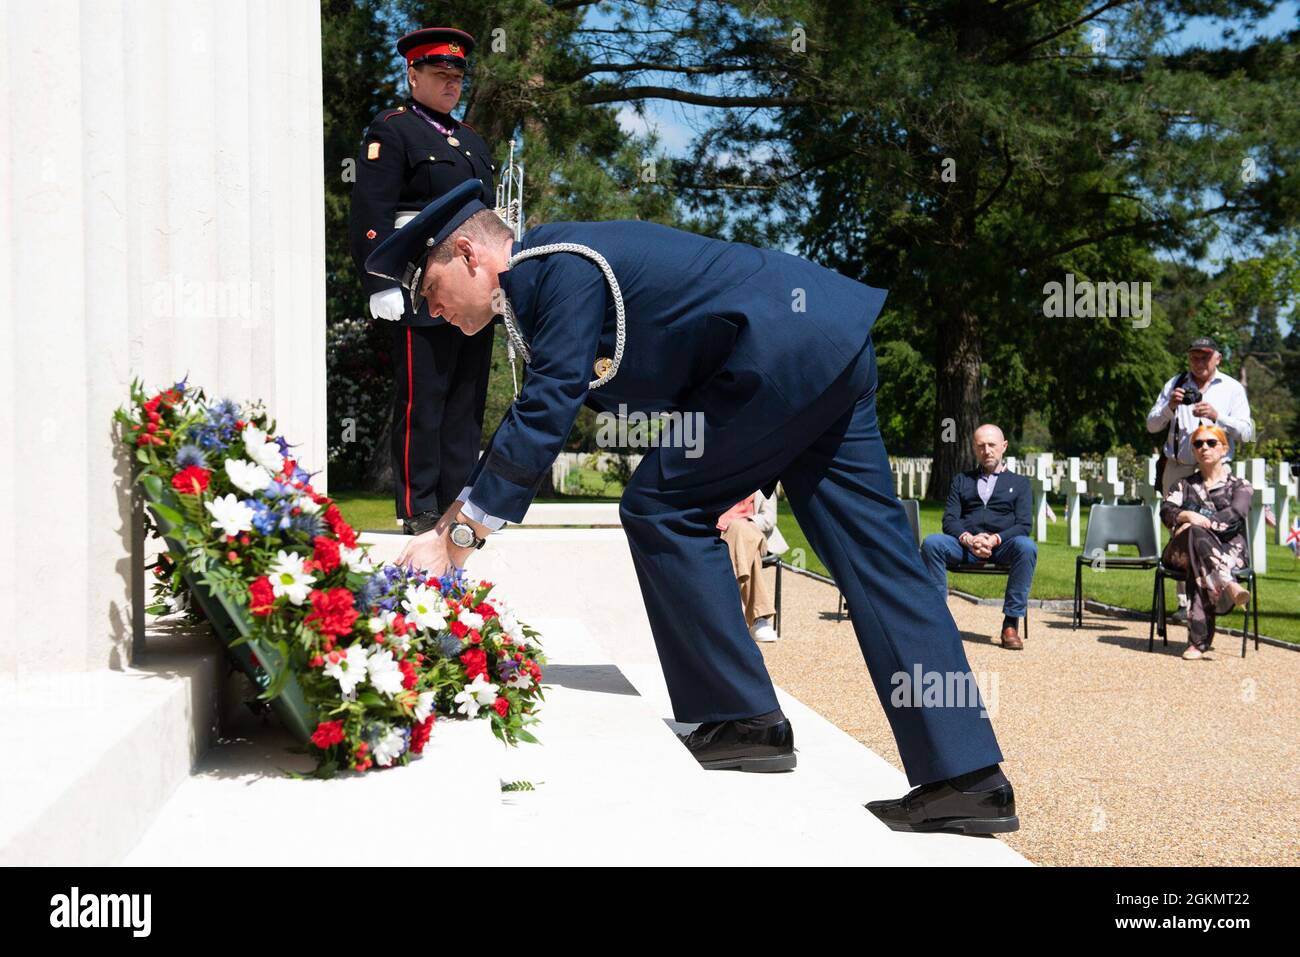 U.S. Air Force Brig. Gen. Jefferson J. O'Donnell, U.S. European Command senior defense official and defense attaché, lays a memorial wreath at a 2021 Memorial Day ceremony at the Brookwood American Military Cemetery, England, May 30, 2021. Memorial Day is one of our Nation's most solemn occasions. It serves as a chance to pause, reflect, and honor the women and men who gave the last full measure defending our Nation and our democratic ideals. Stock Photo